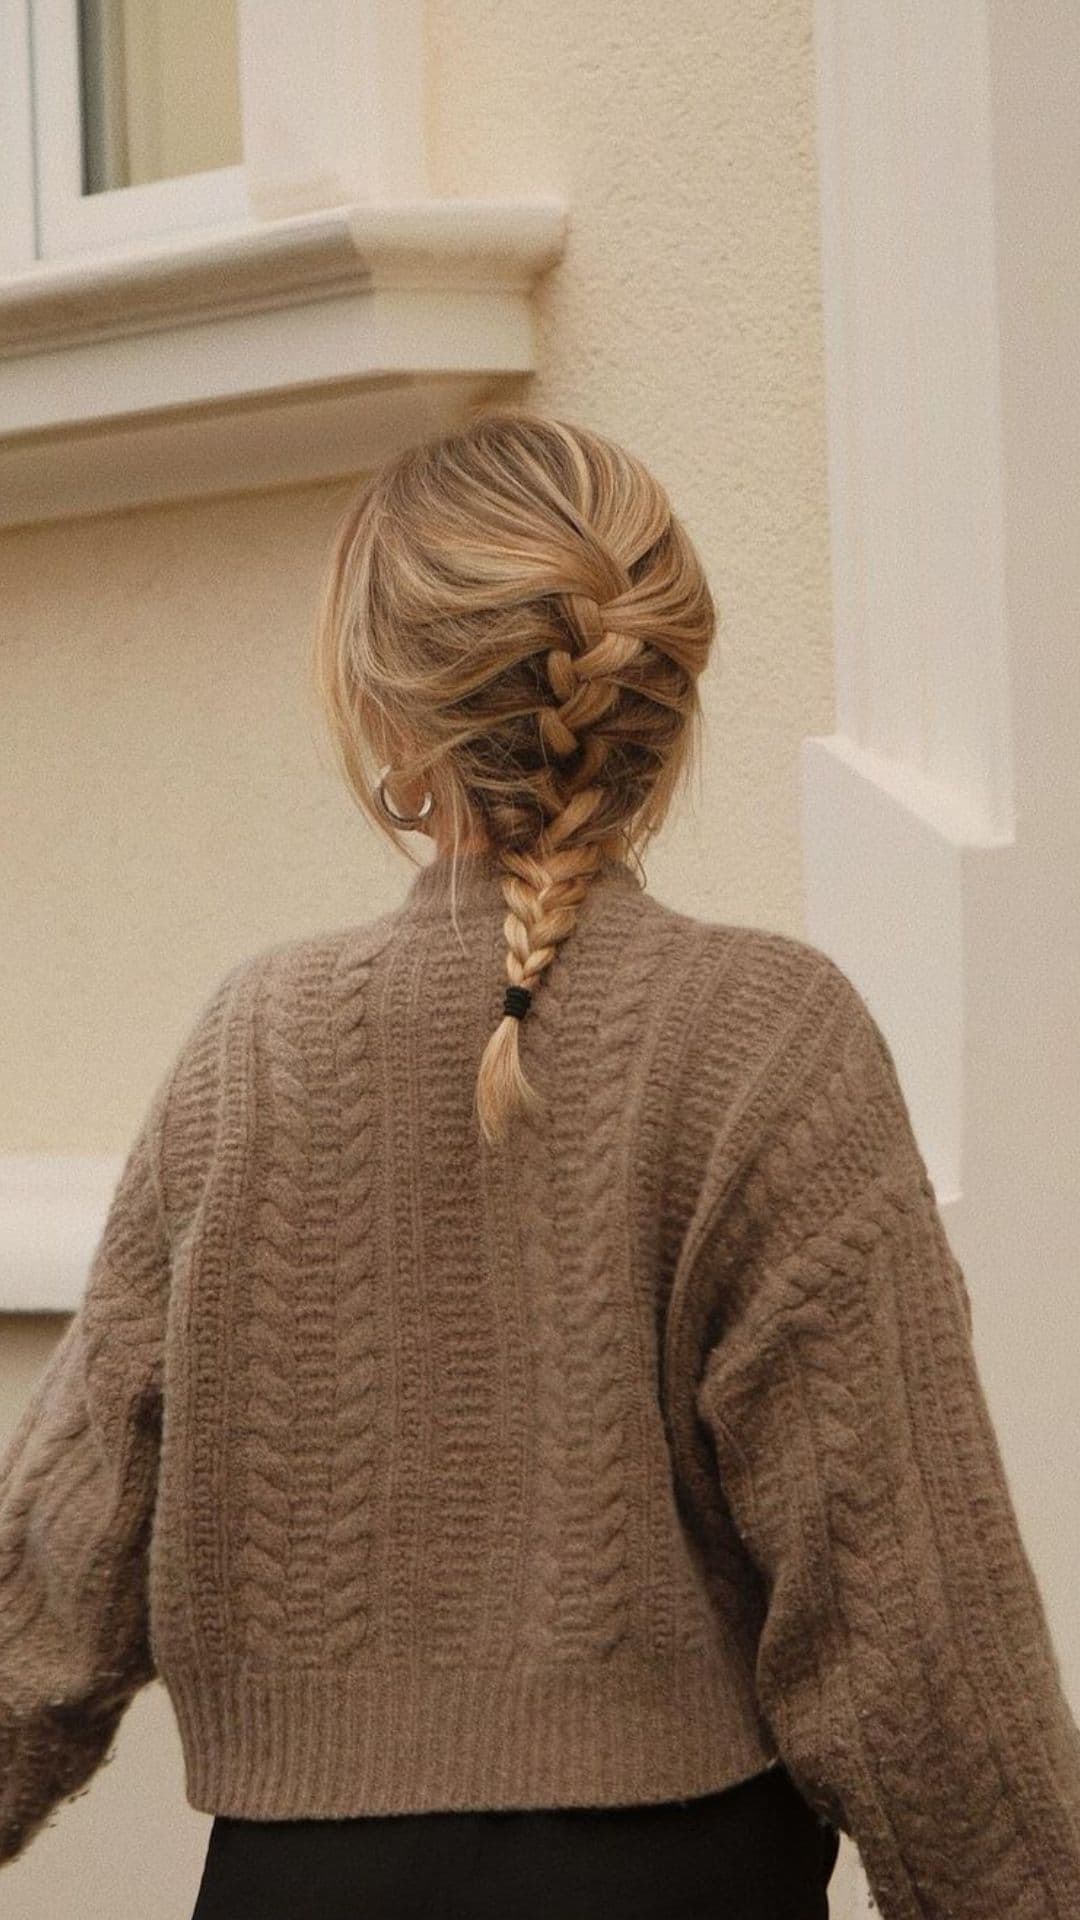 A woman with a blonde fishtail braid.